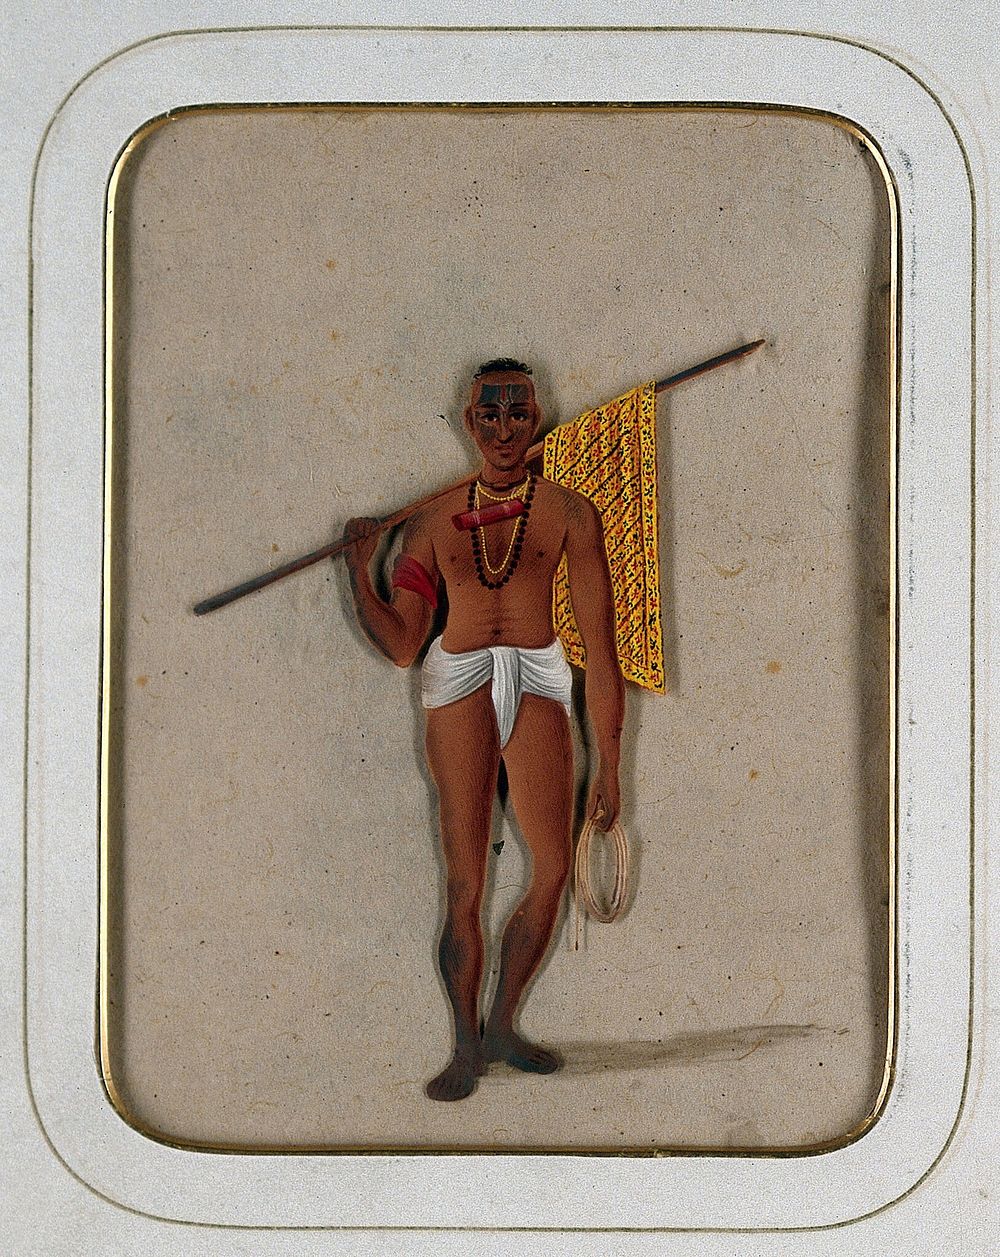 A man wearing a loin cloth holding a stick with a piece of cloth draped around it and a coil of string. Gouache painting on…